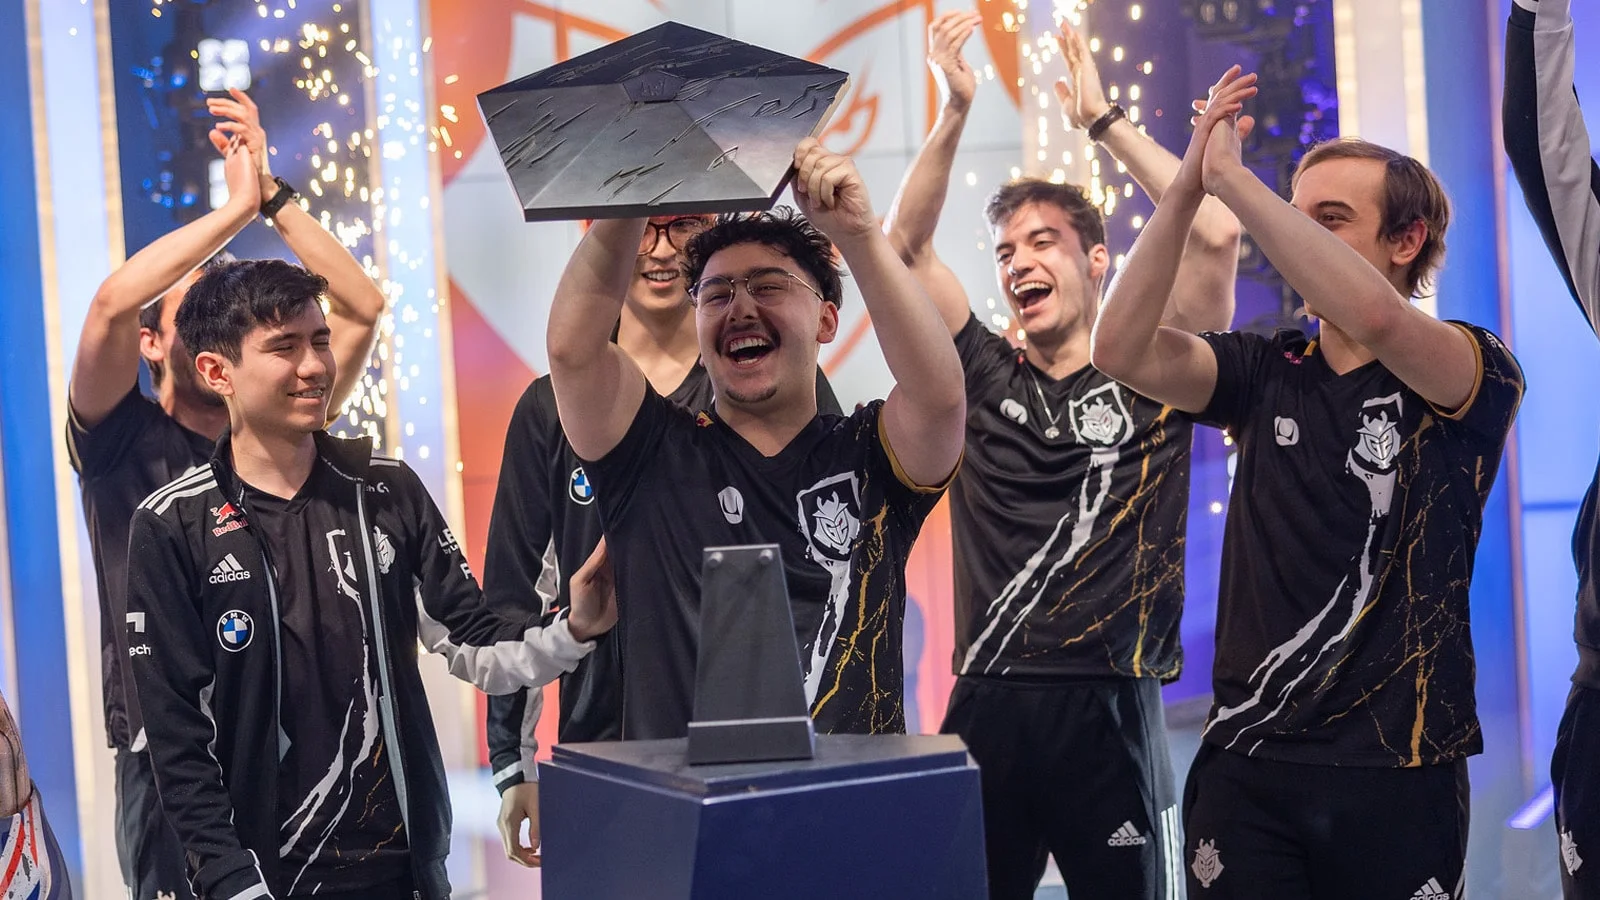 G2 dominates on both Riot Games esports titles – VALORANT & League of Legends